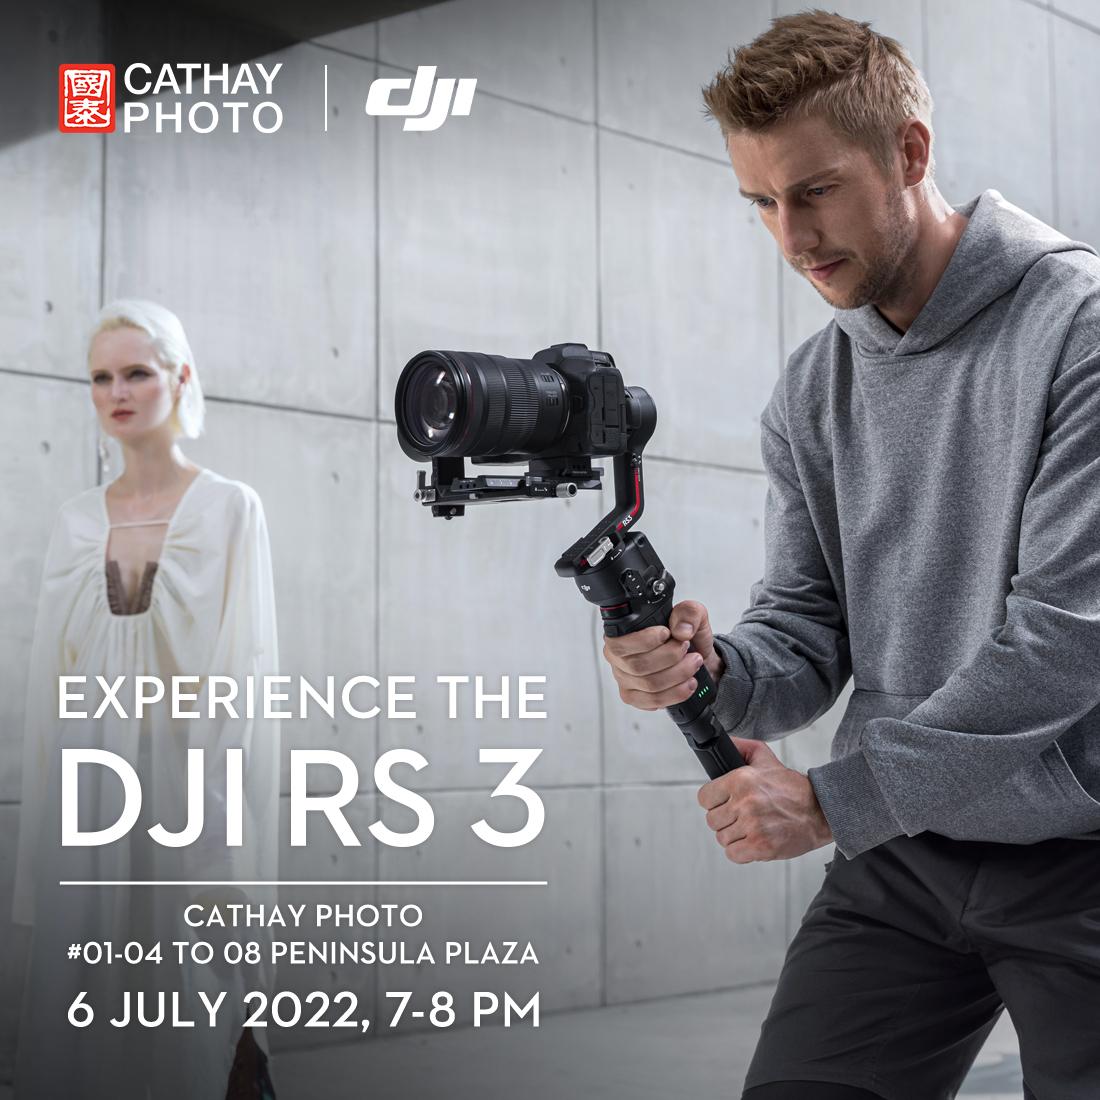 Experience the DJI RS 3!